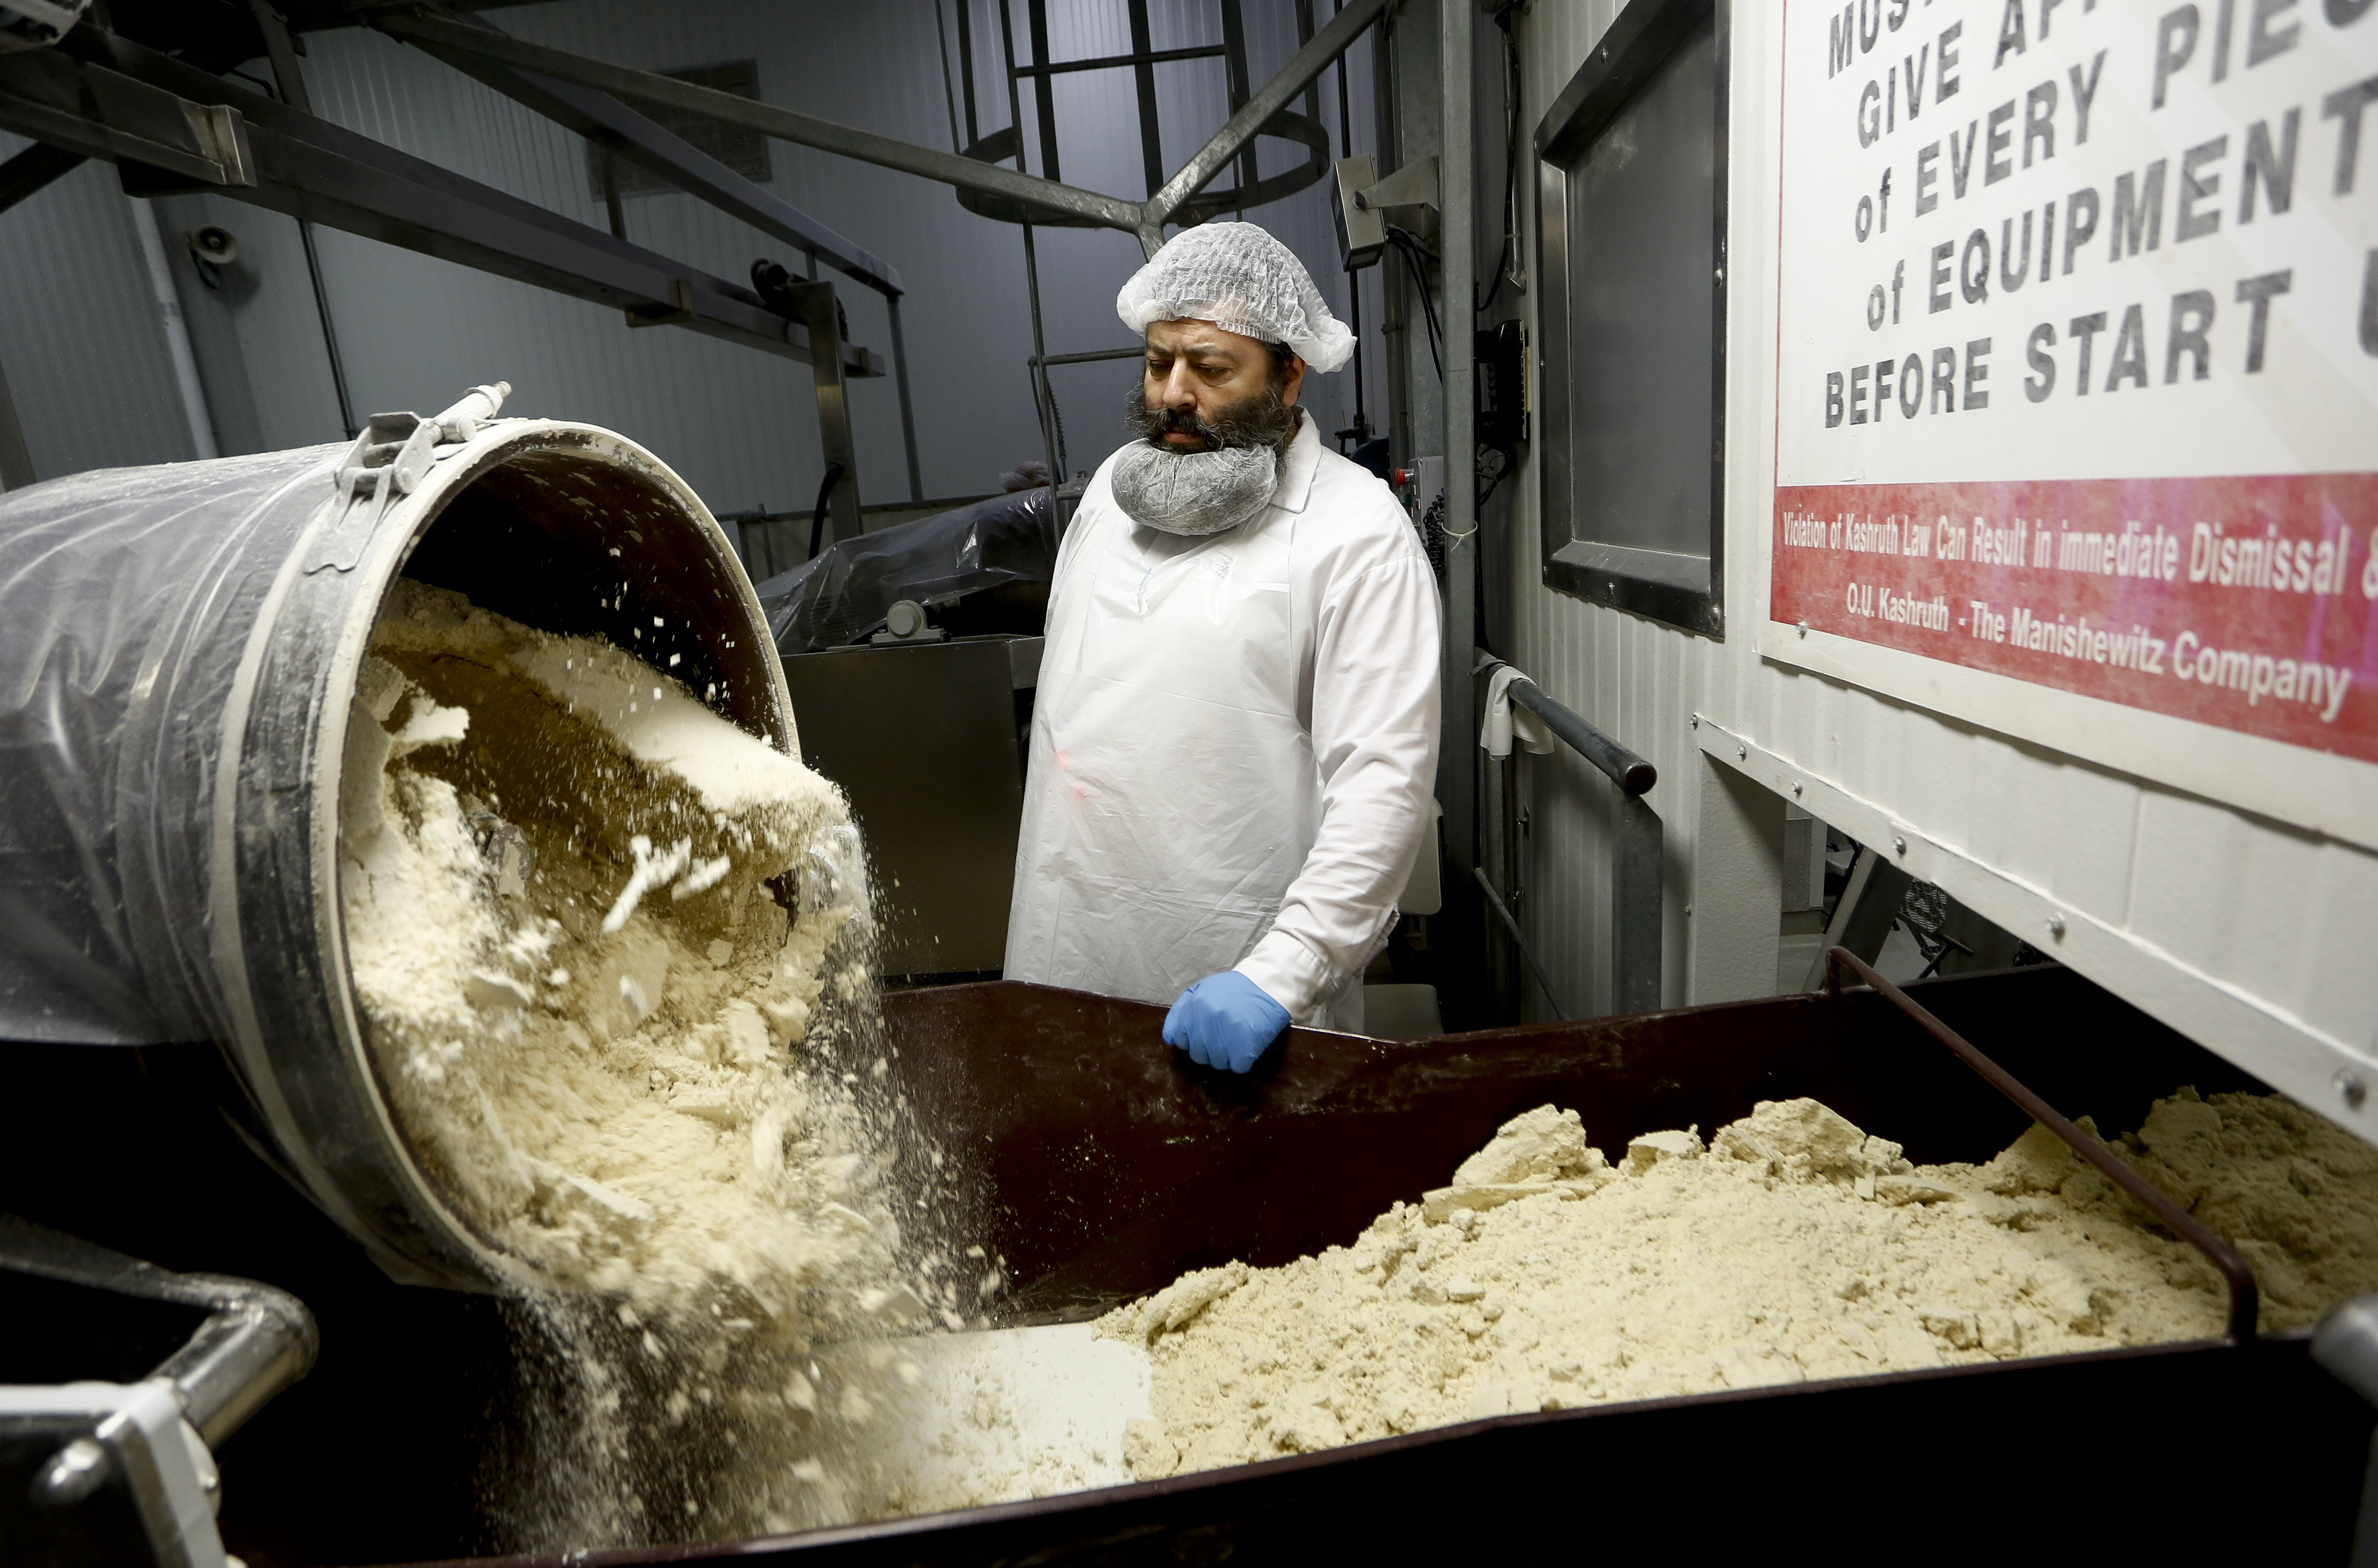 Yehida Kaplovitch, a Mashgiach, or rabbinical supervisor, oversees the mixing of flour on the matzo production line at the Manischewitz manufacturing facility in Newark in 2014.